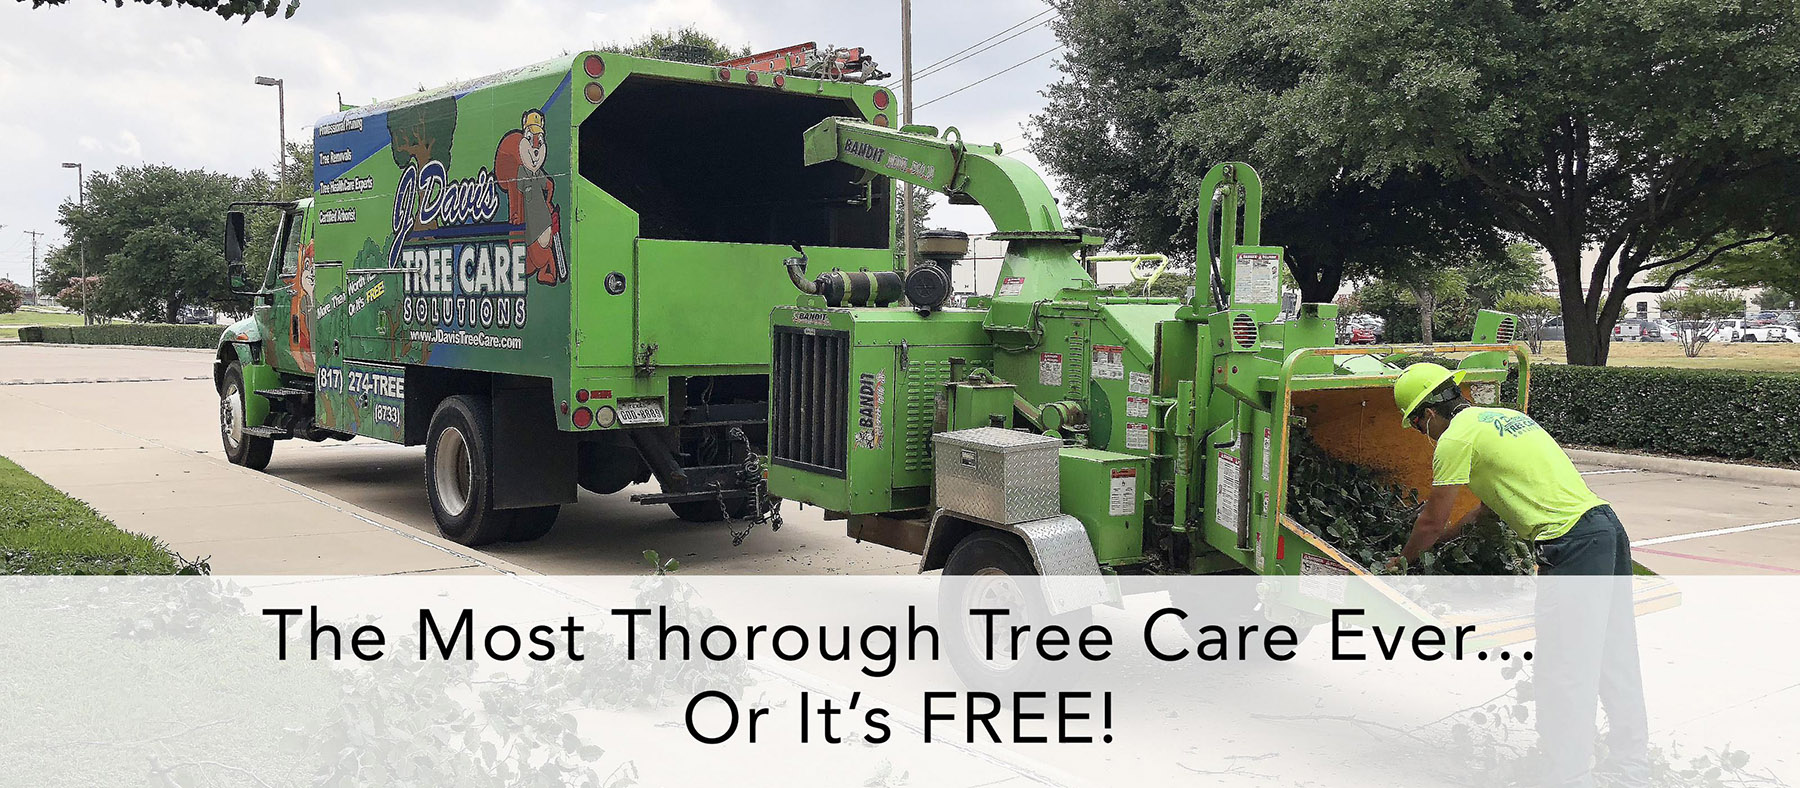 Roanoke Tree Care. What You Need from Expert Arborists